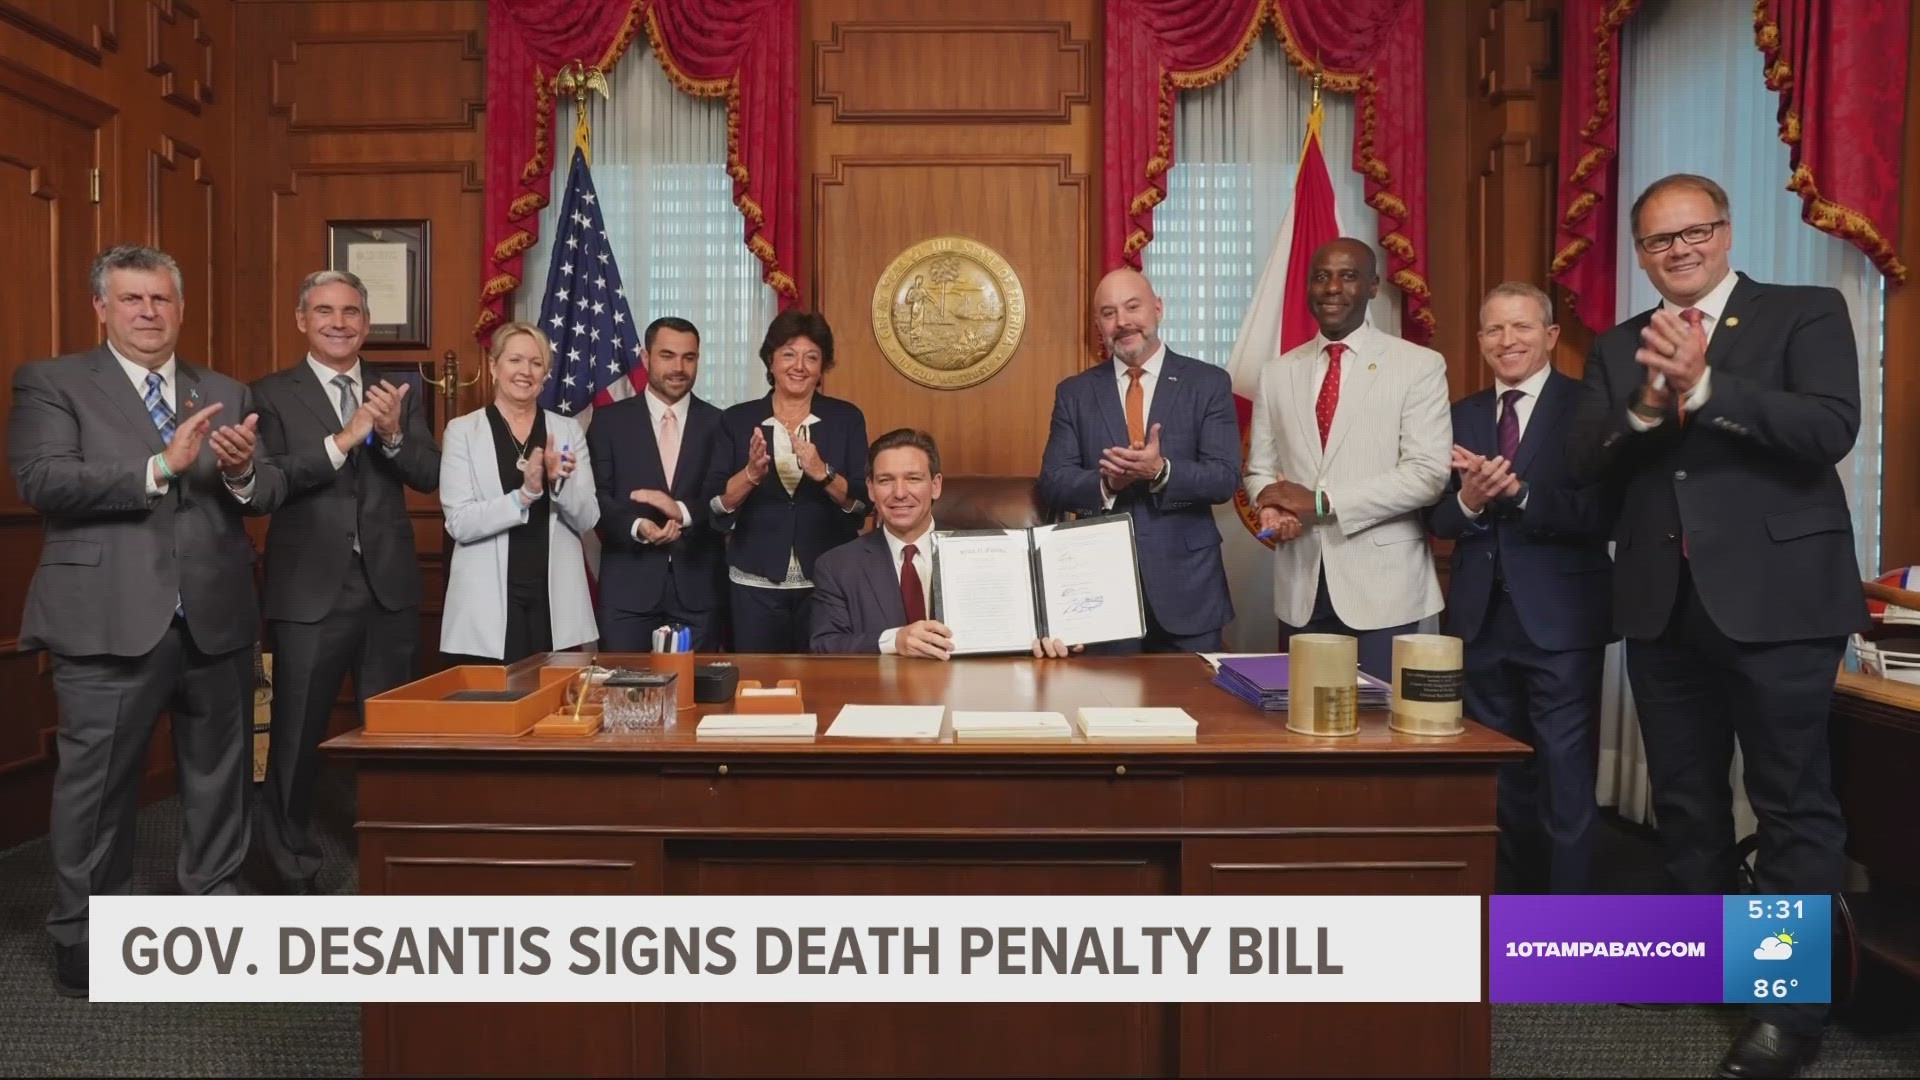 Gov. DeSantis signed the bill in a private ceremony with families of victims of the 2018 Marjory Stoneman Douglas High School massacre in Parkland.